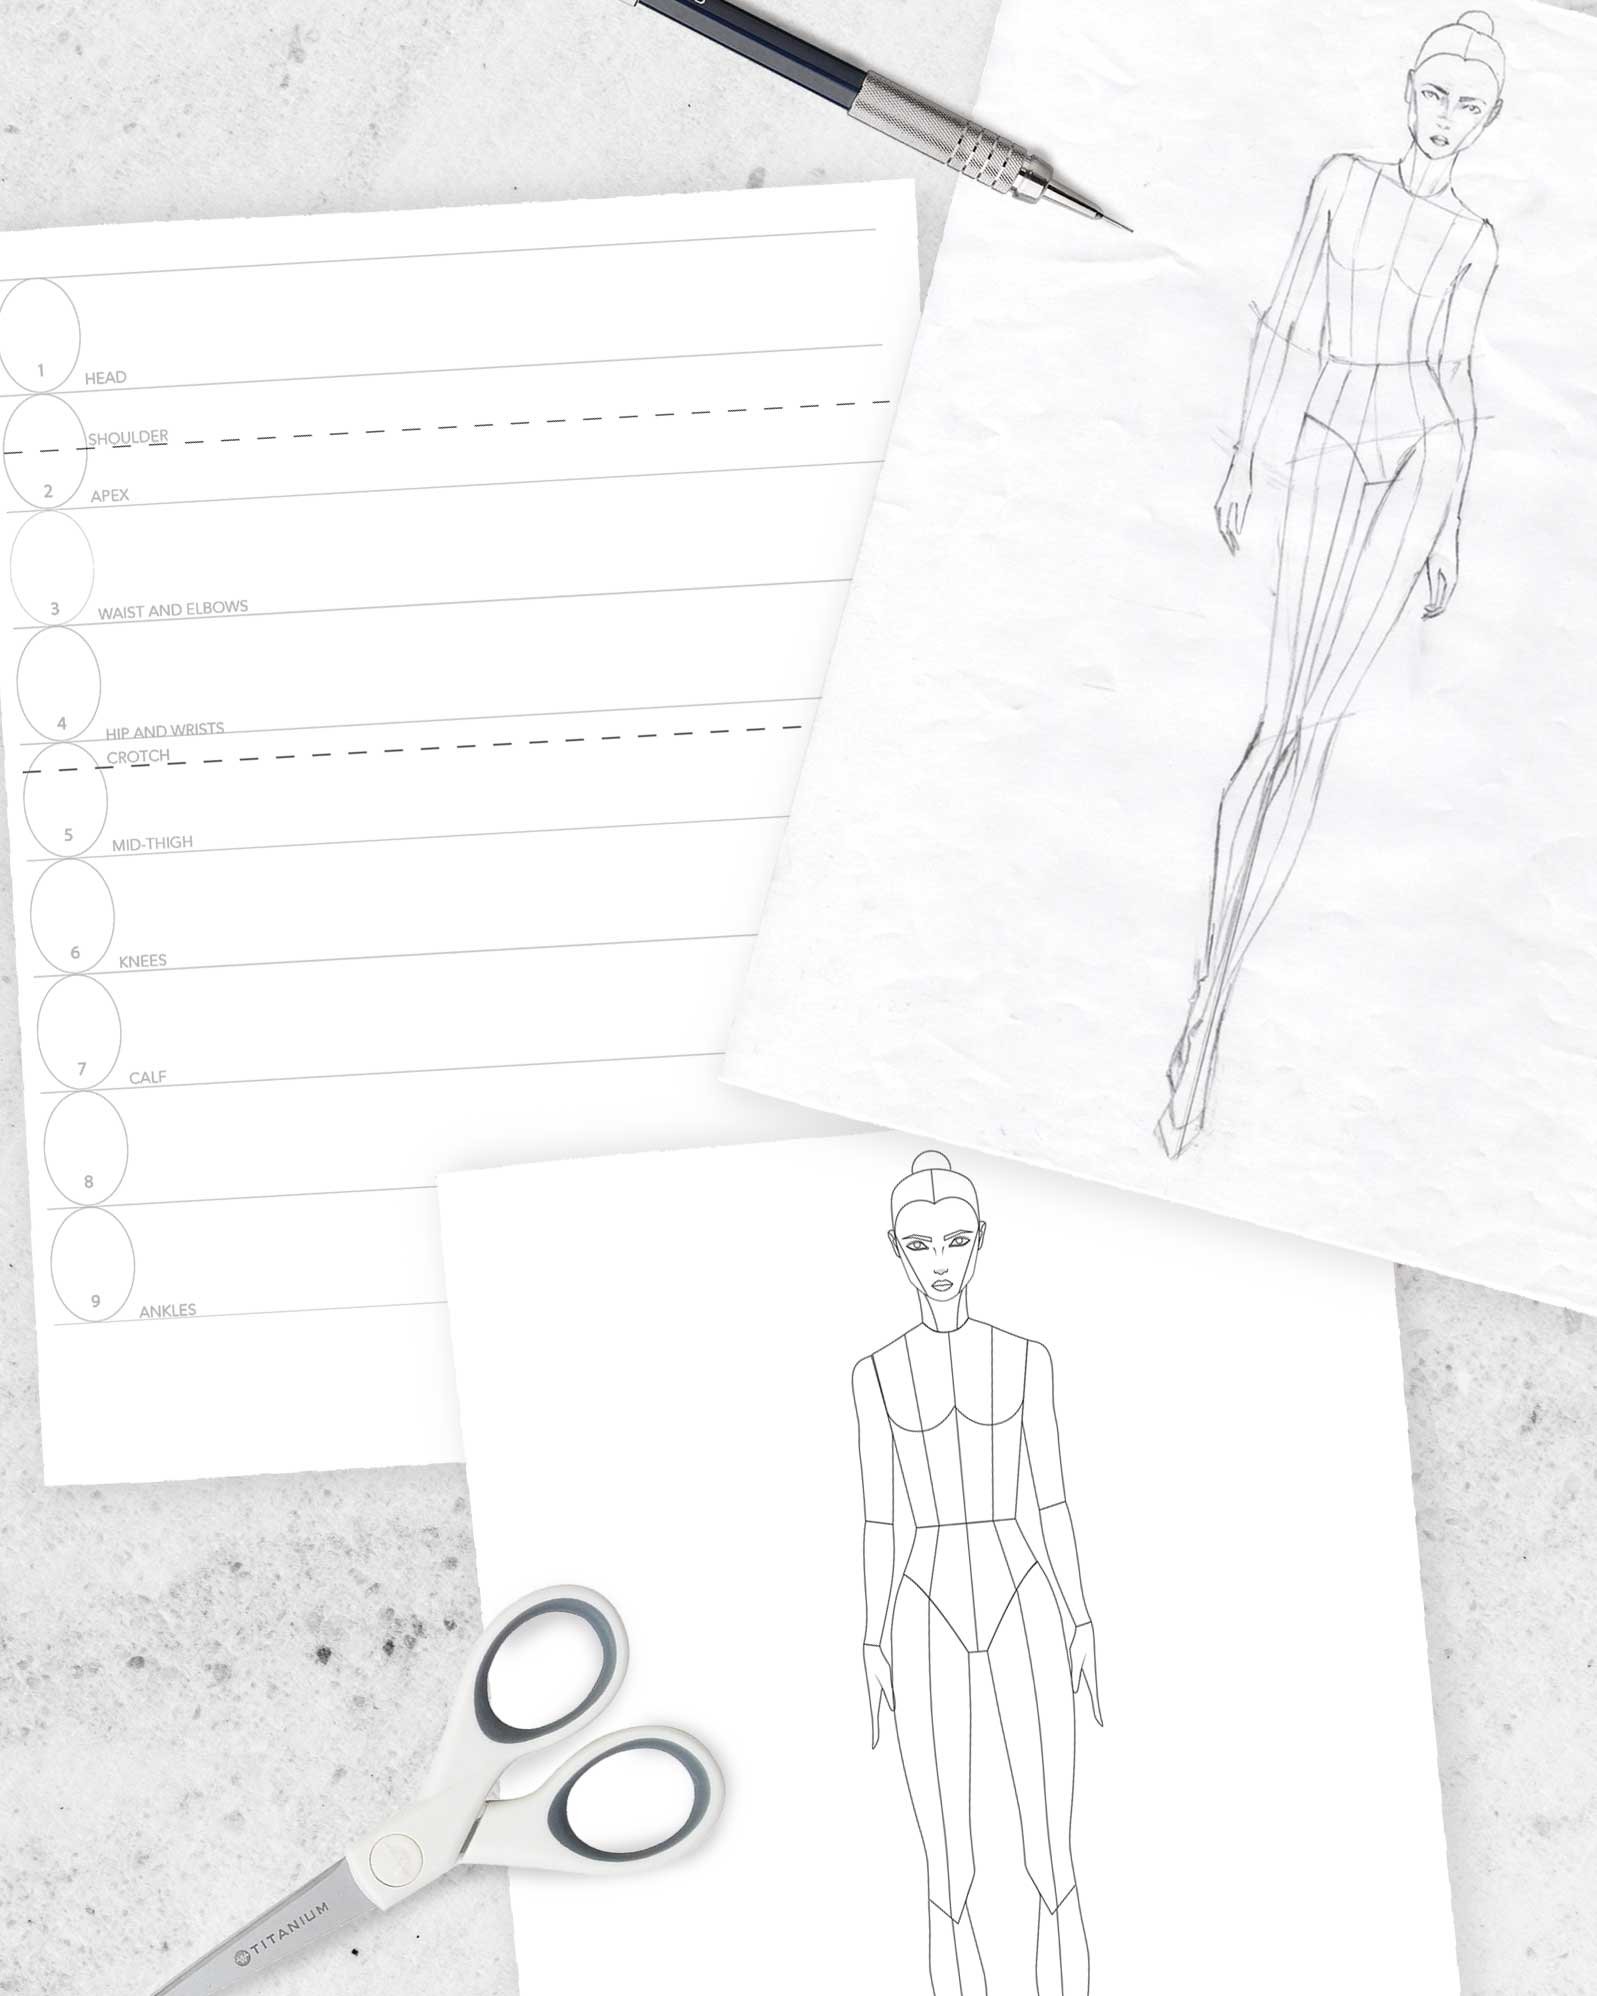 CROQUIS KIT: a collection of fashion figure templates for design and  illustration, 9 heads female — amiko simonetti